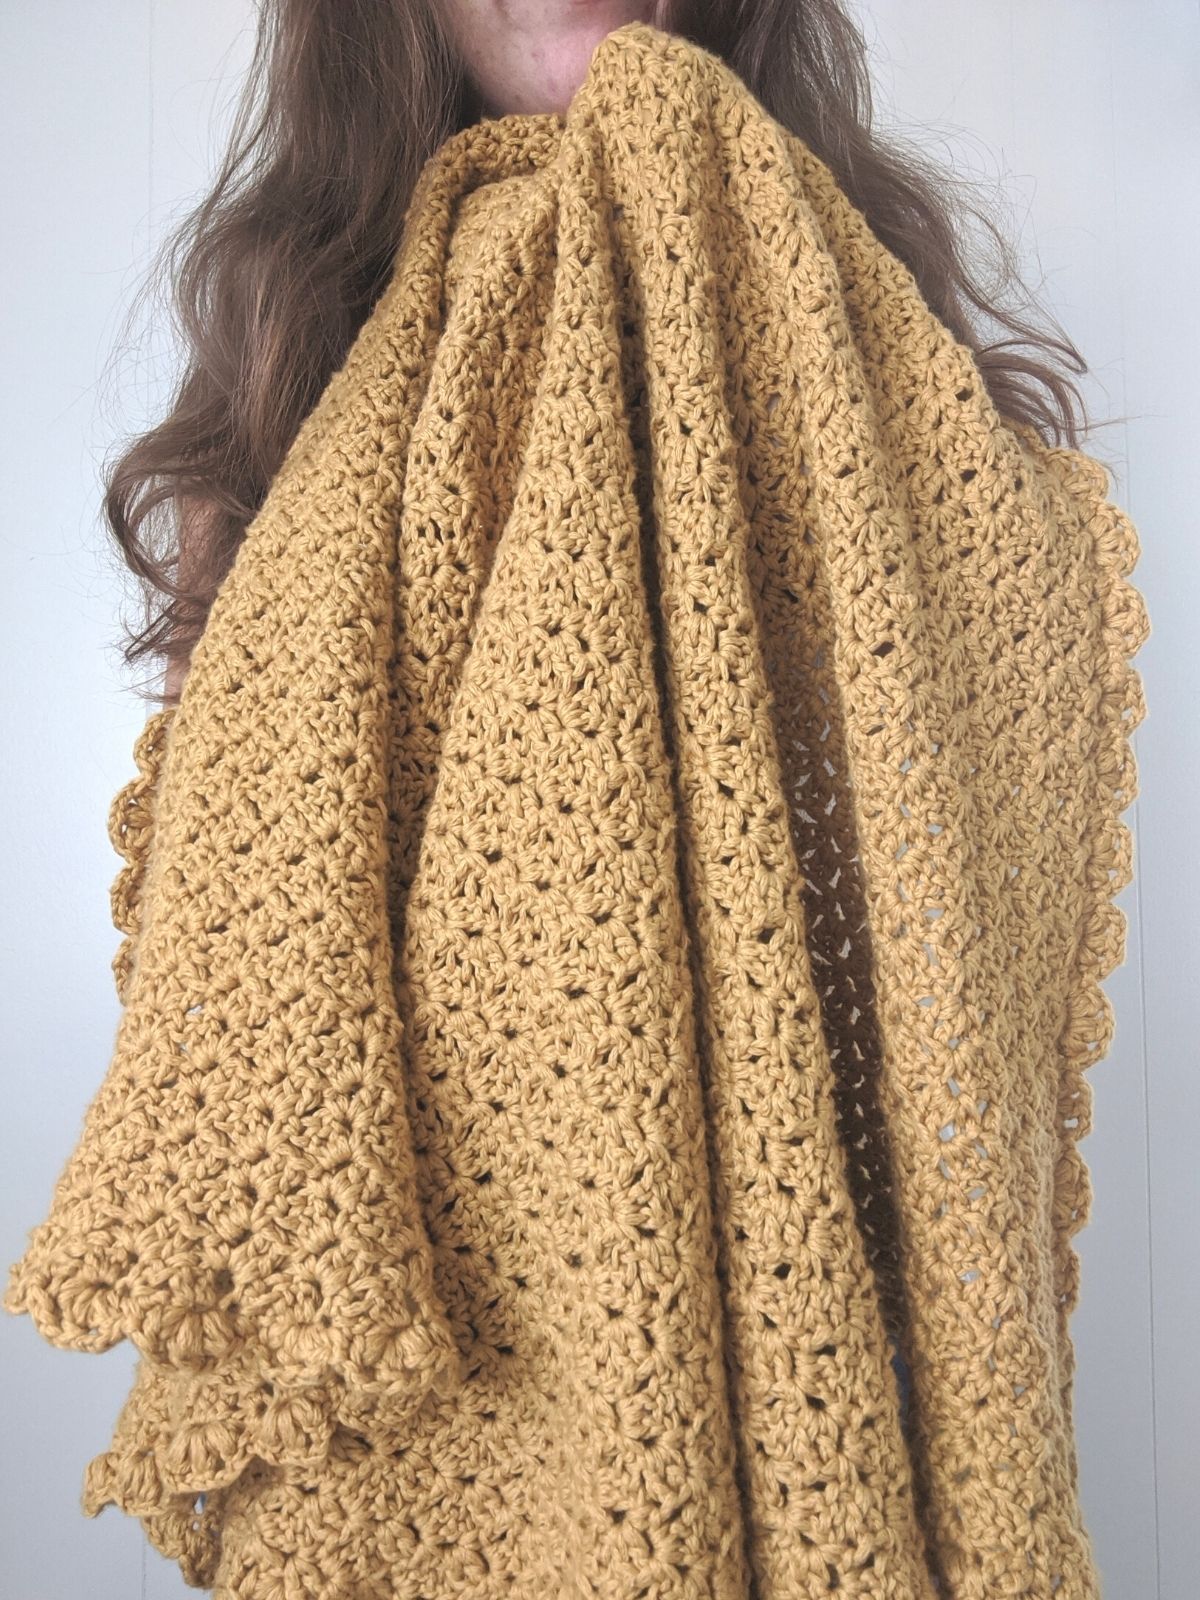 model is holding a yellow cotton crochet blanket